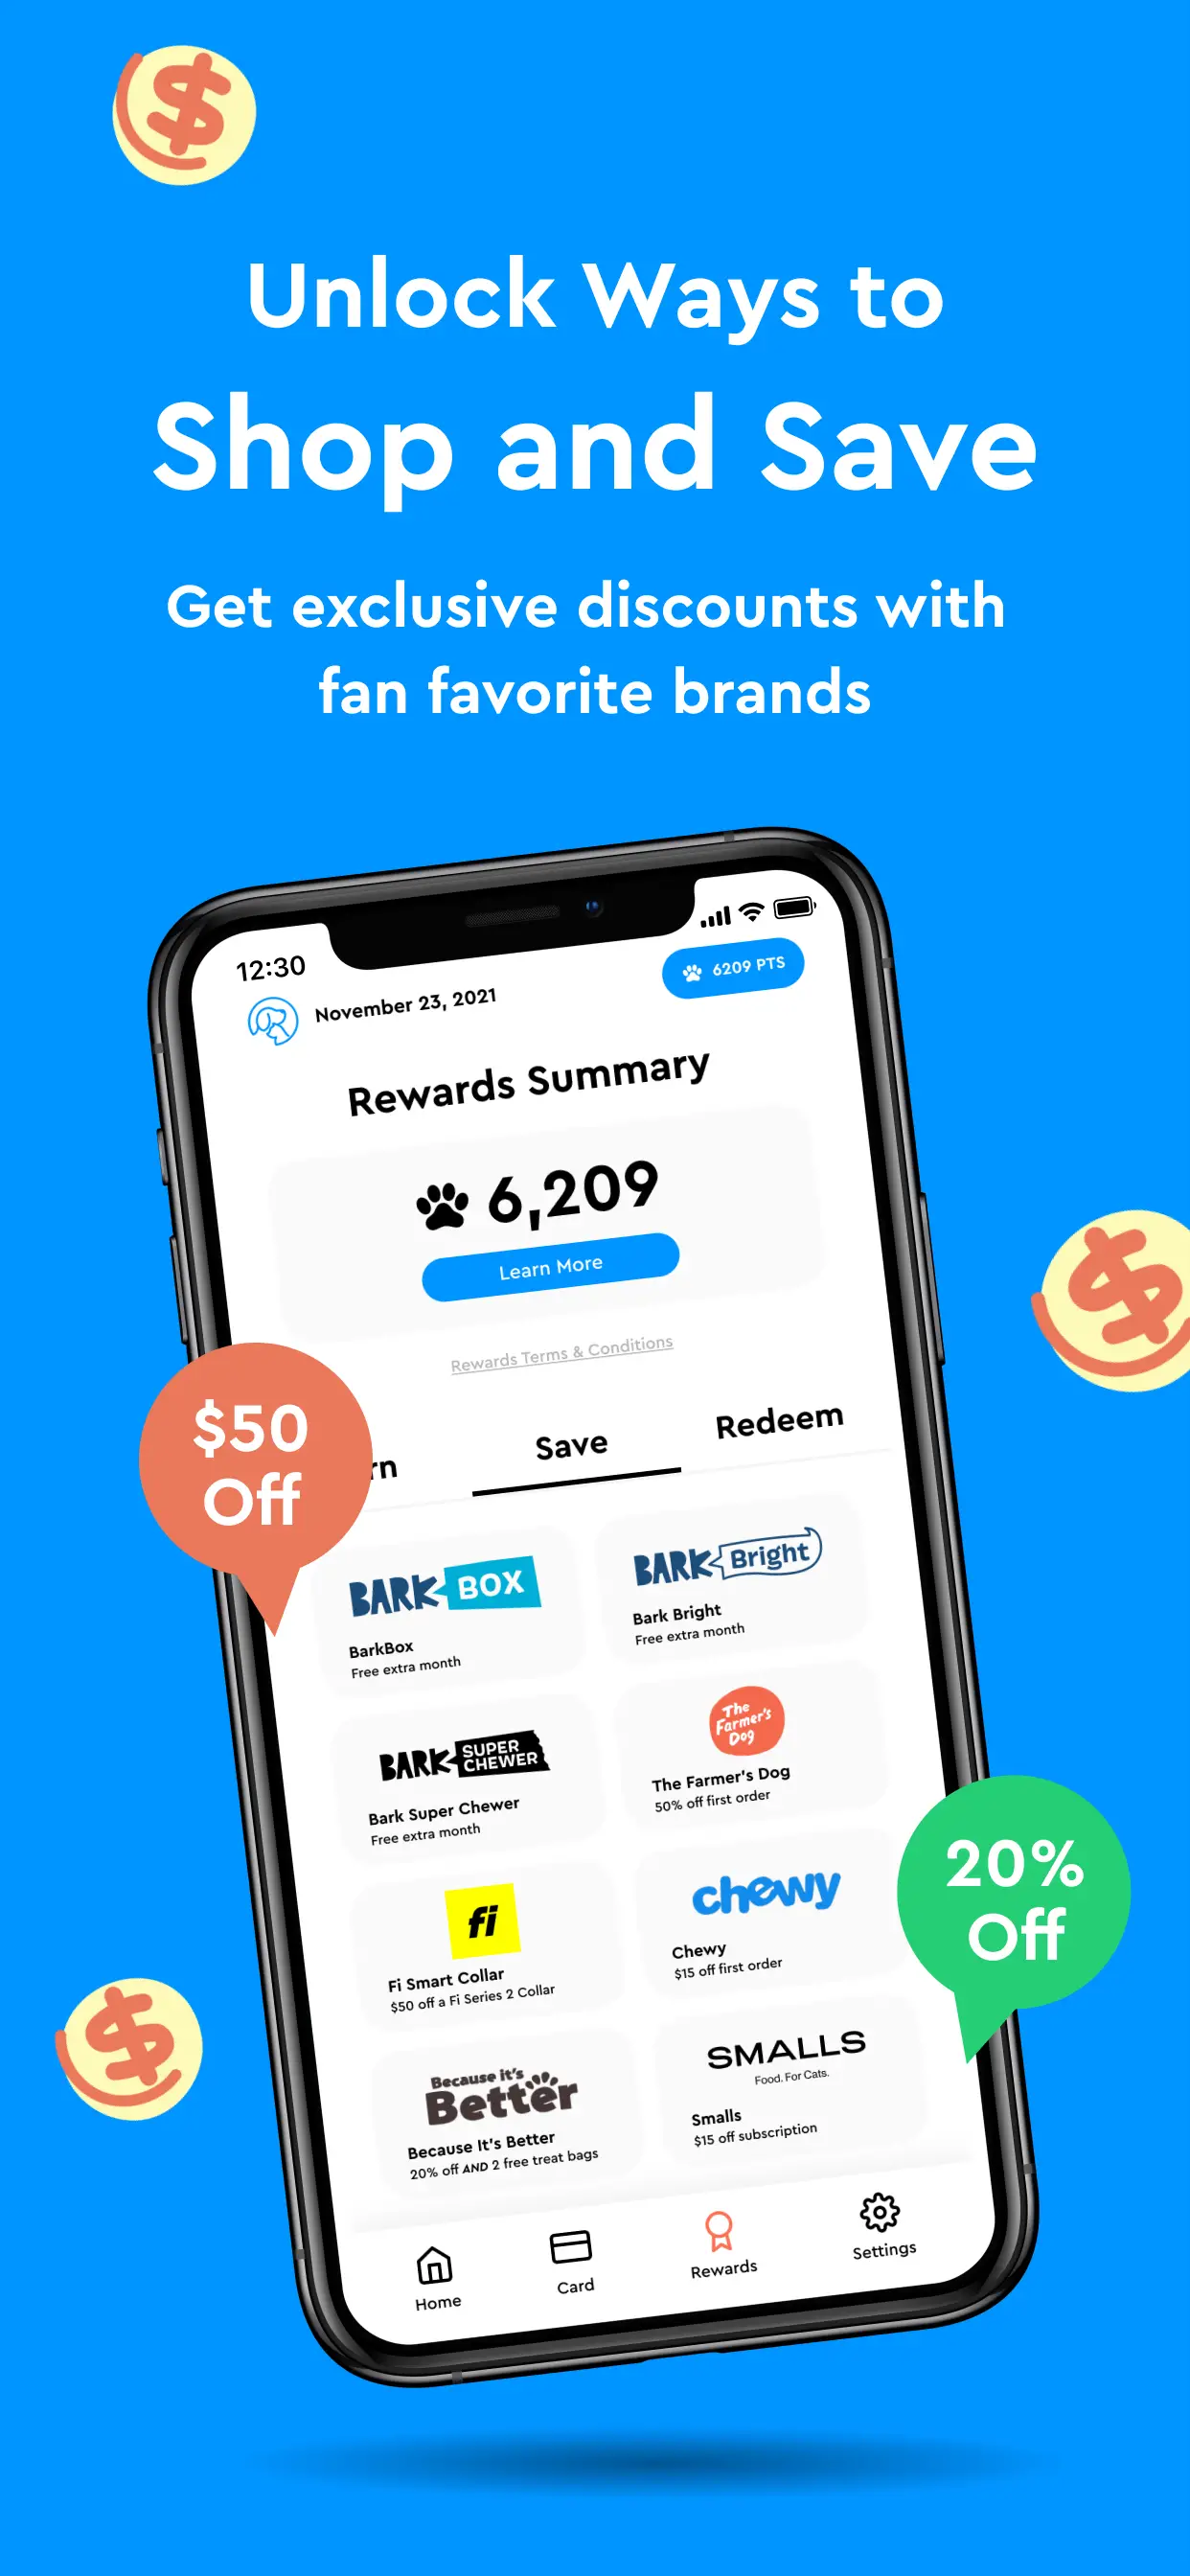 Unlock ways to shop and save with Fursure card